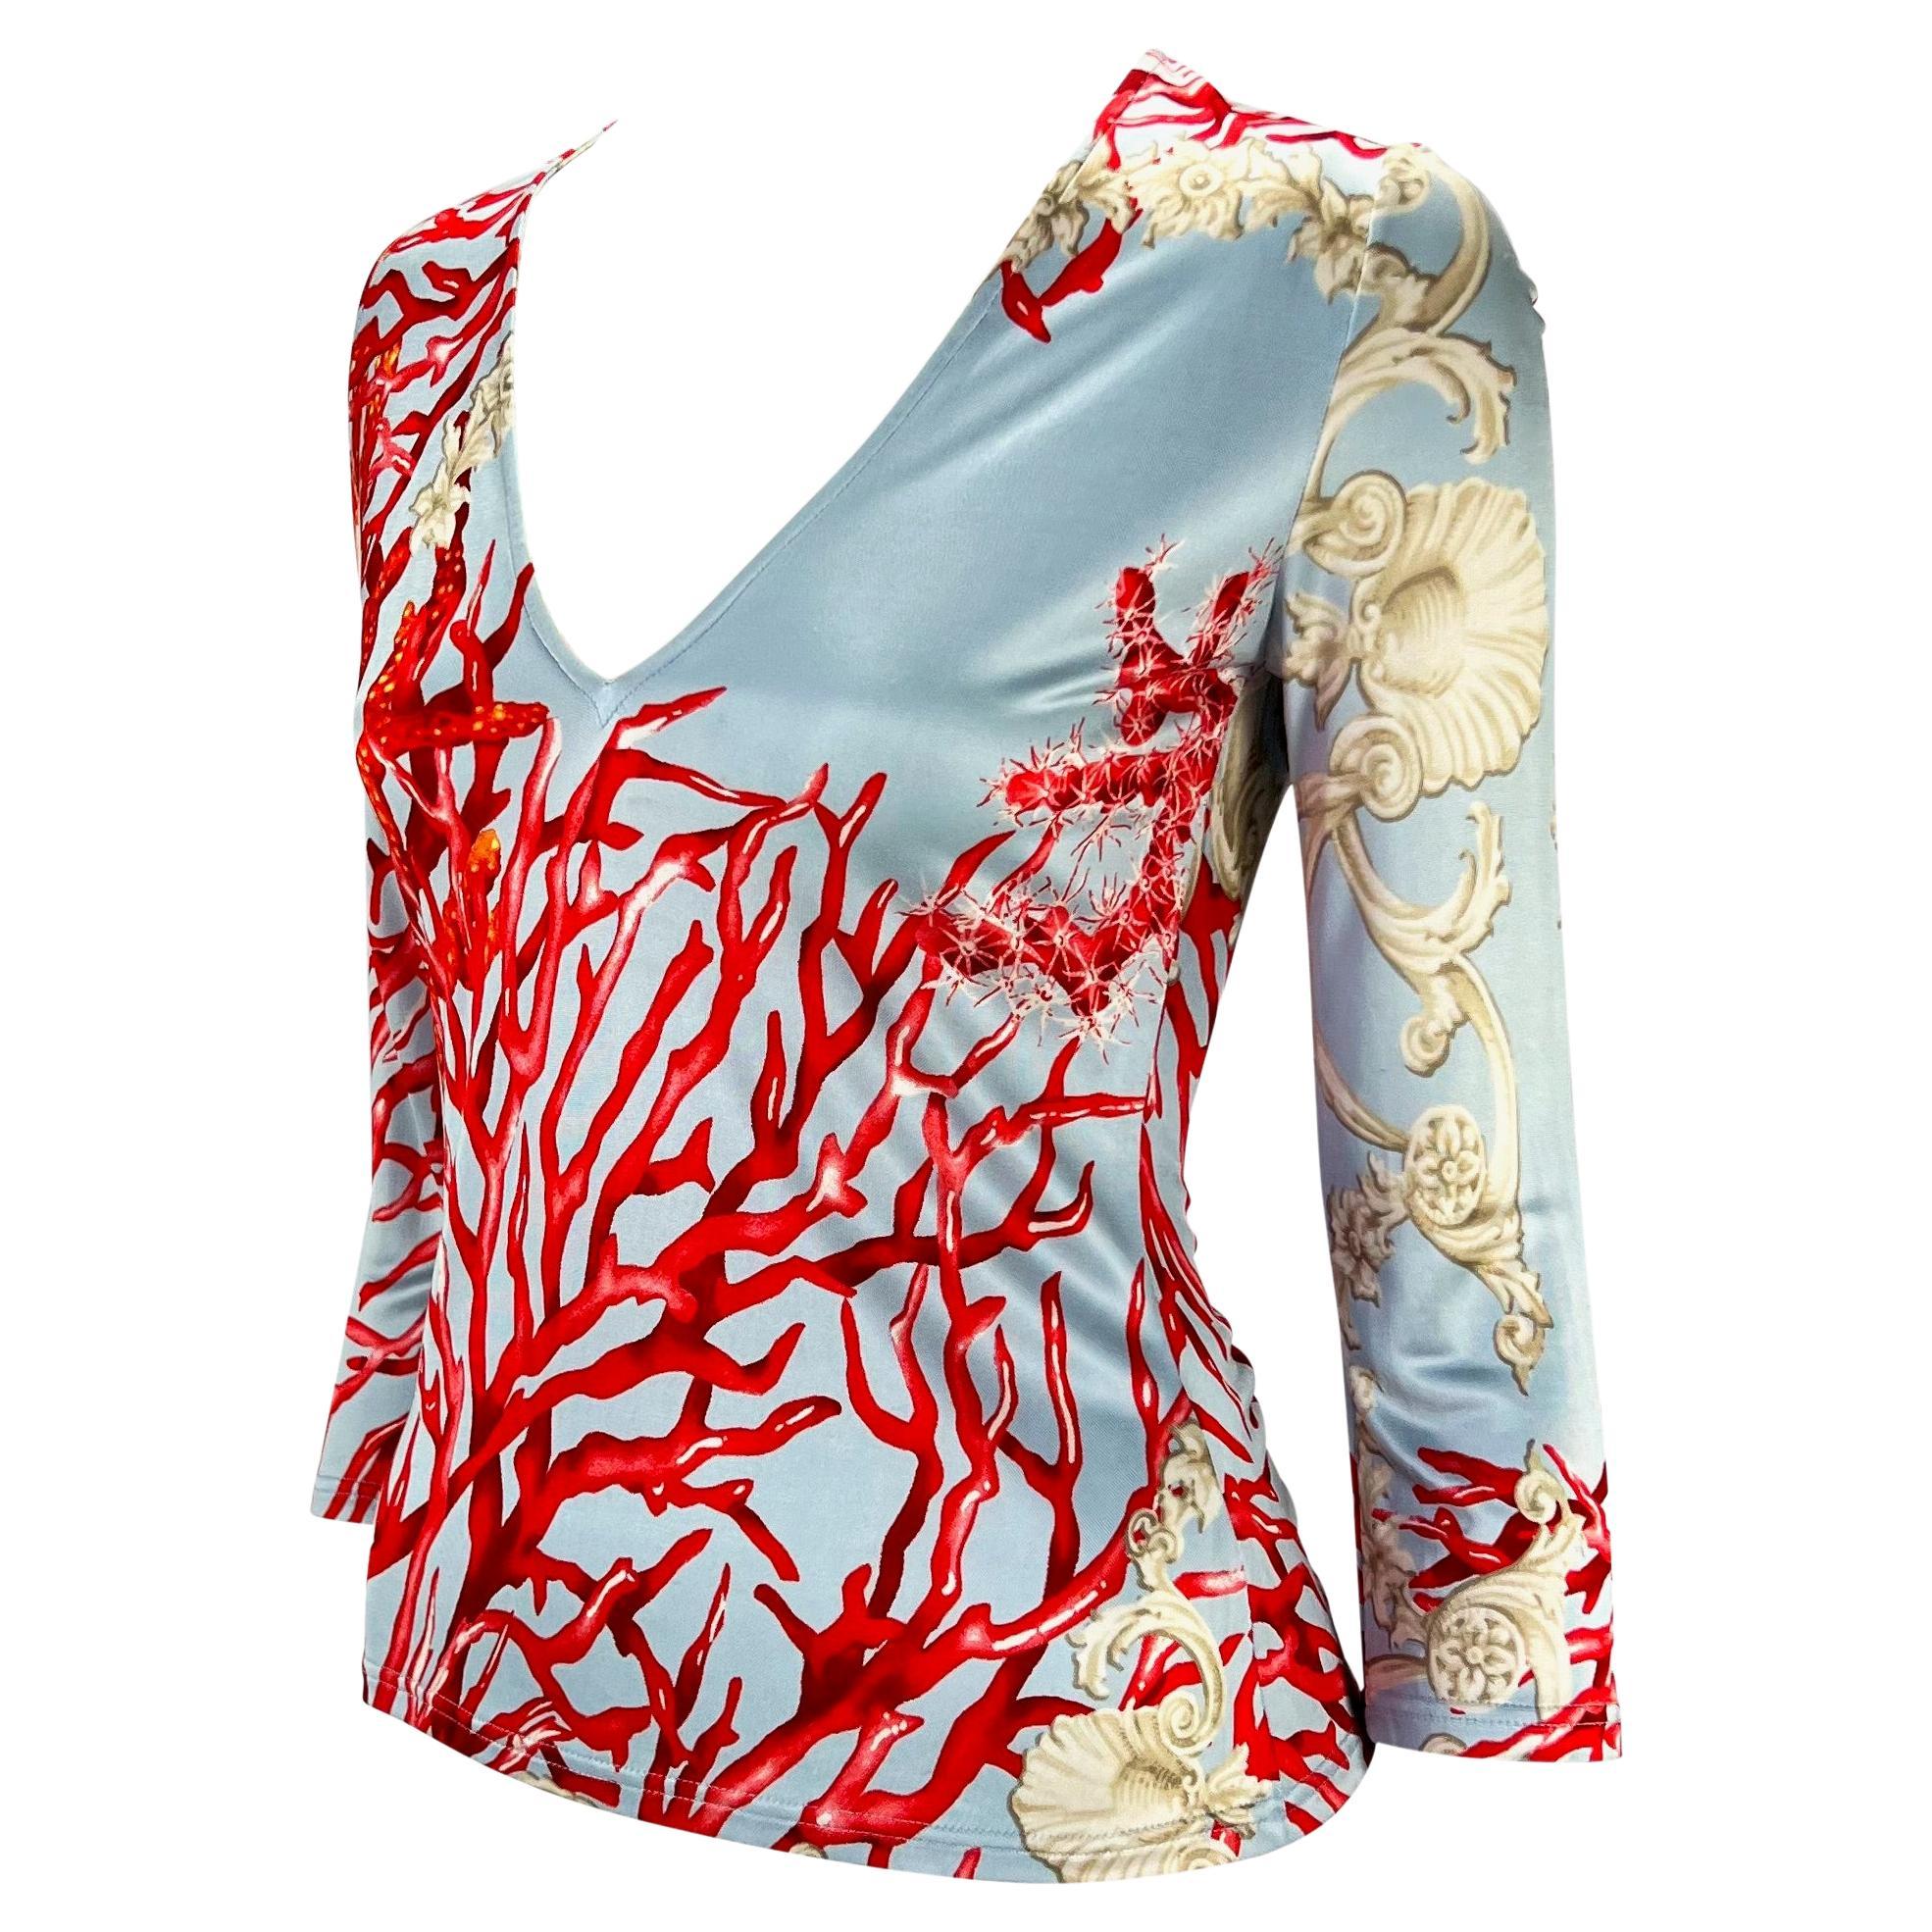 S/S 2005 Versace by Donatella Blue Coral Print Medusa Buckle Viscose Top In Excellent Condition For Sale In West Hollywood, CA